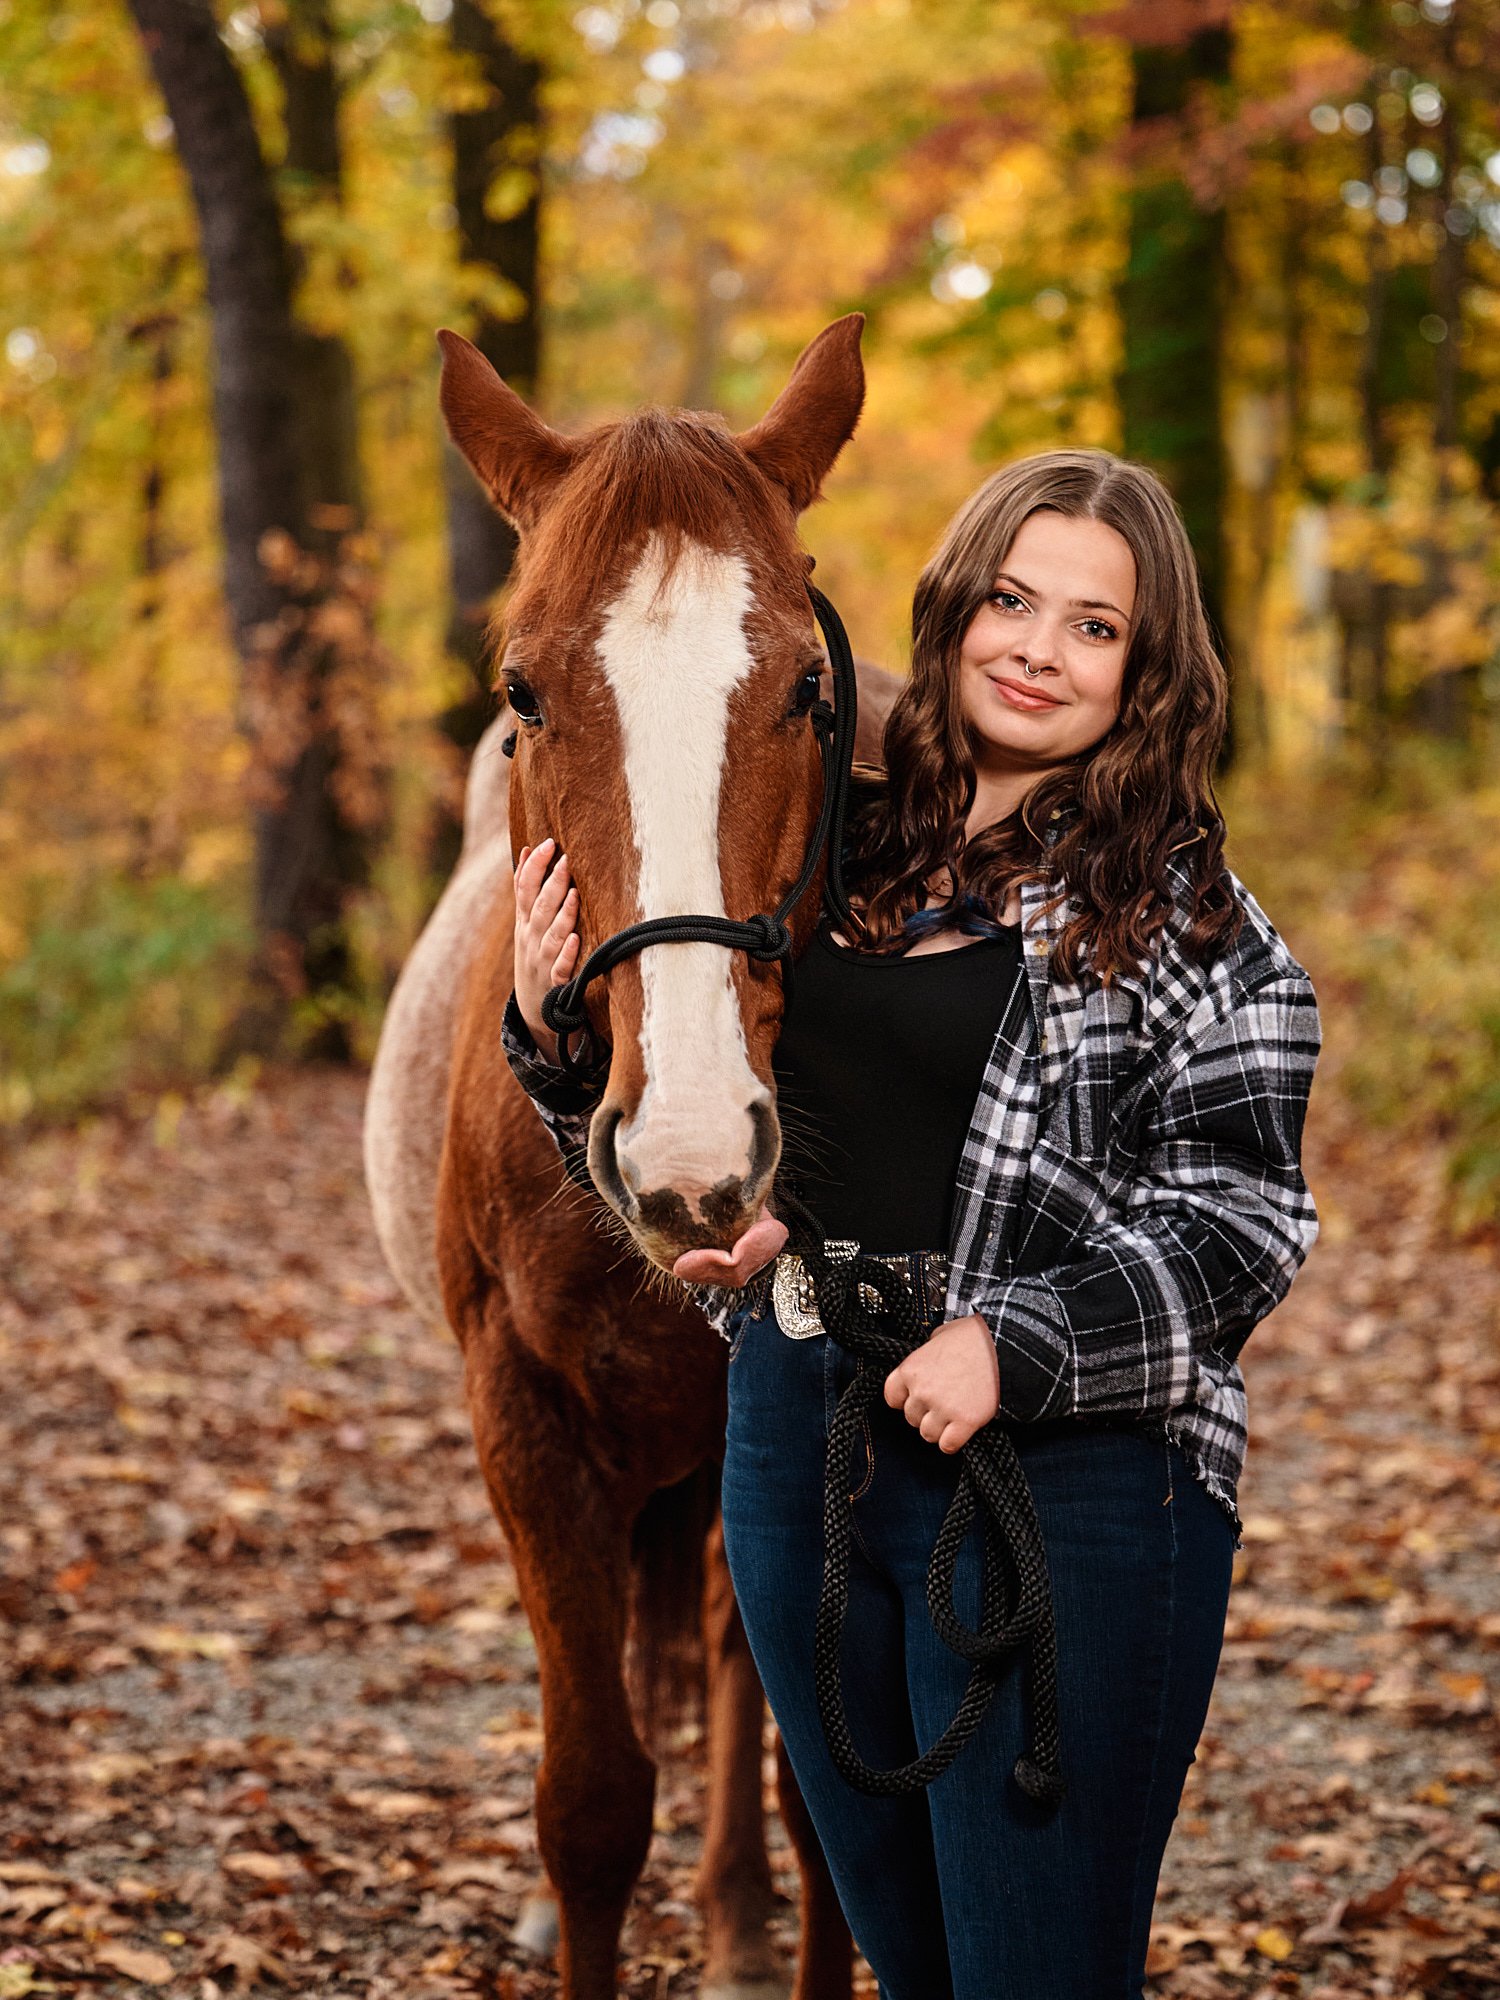  Heavyn Kerr is posing for high school senior portraits with a quarter horse in Hookstown PA. November fall foliage is at its peak with yellow and orange colors all around the beautiful teenage girl. 